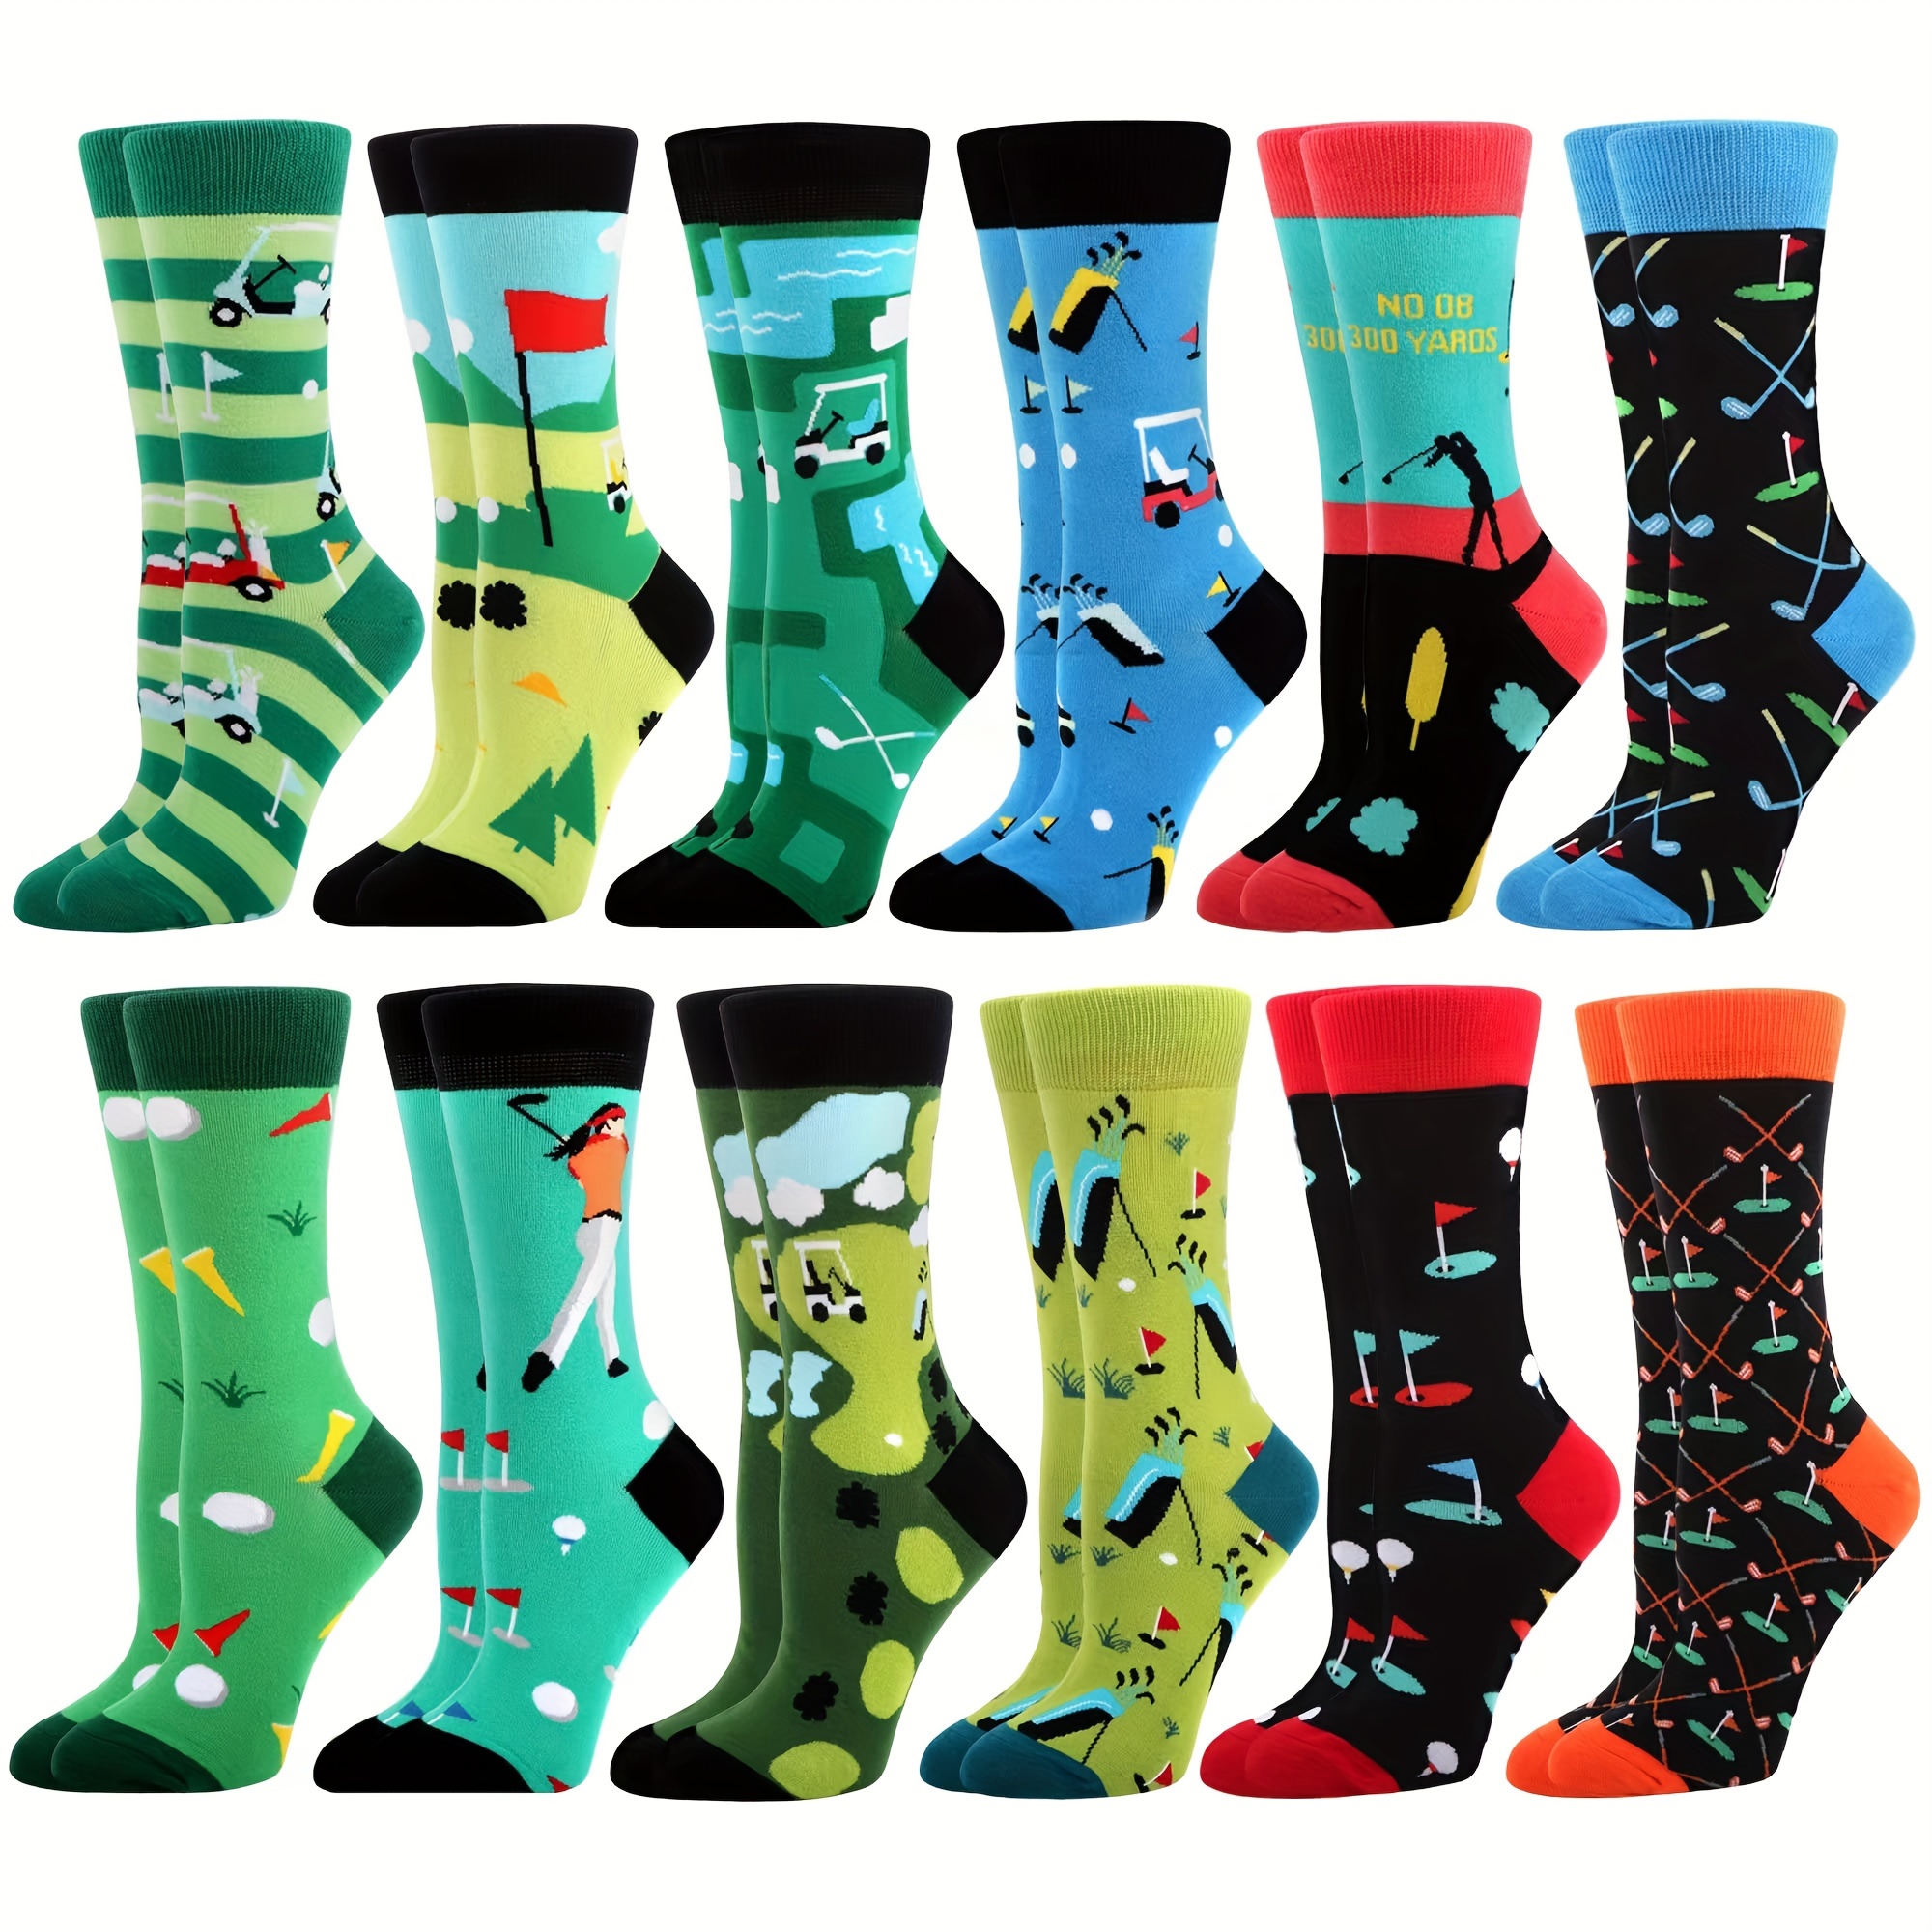 

12 Pairs Women's Socks Funny Casual Combed Casual Socks Colorful Golf Pattern (us Sizes 8-12)